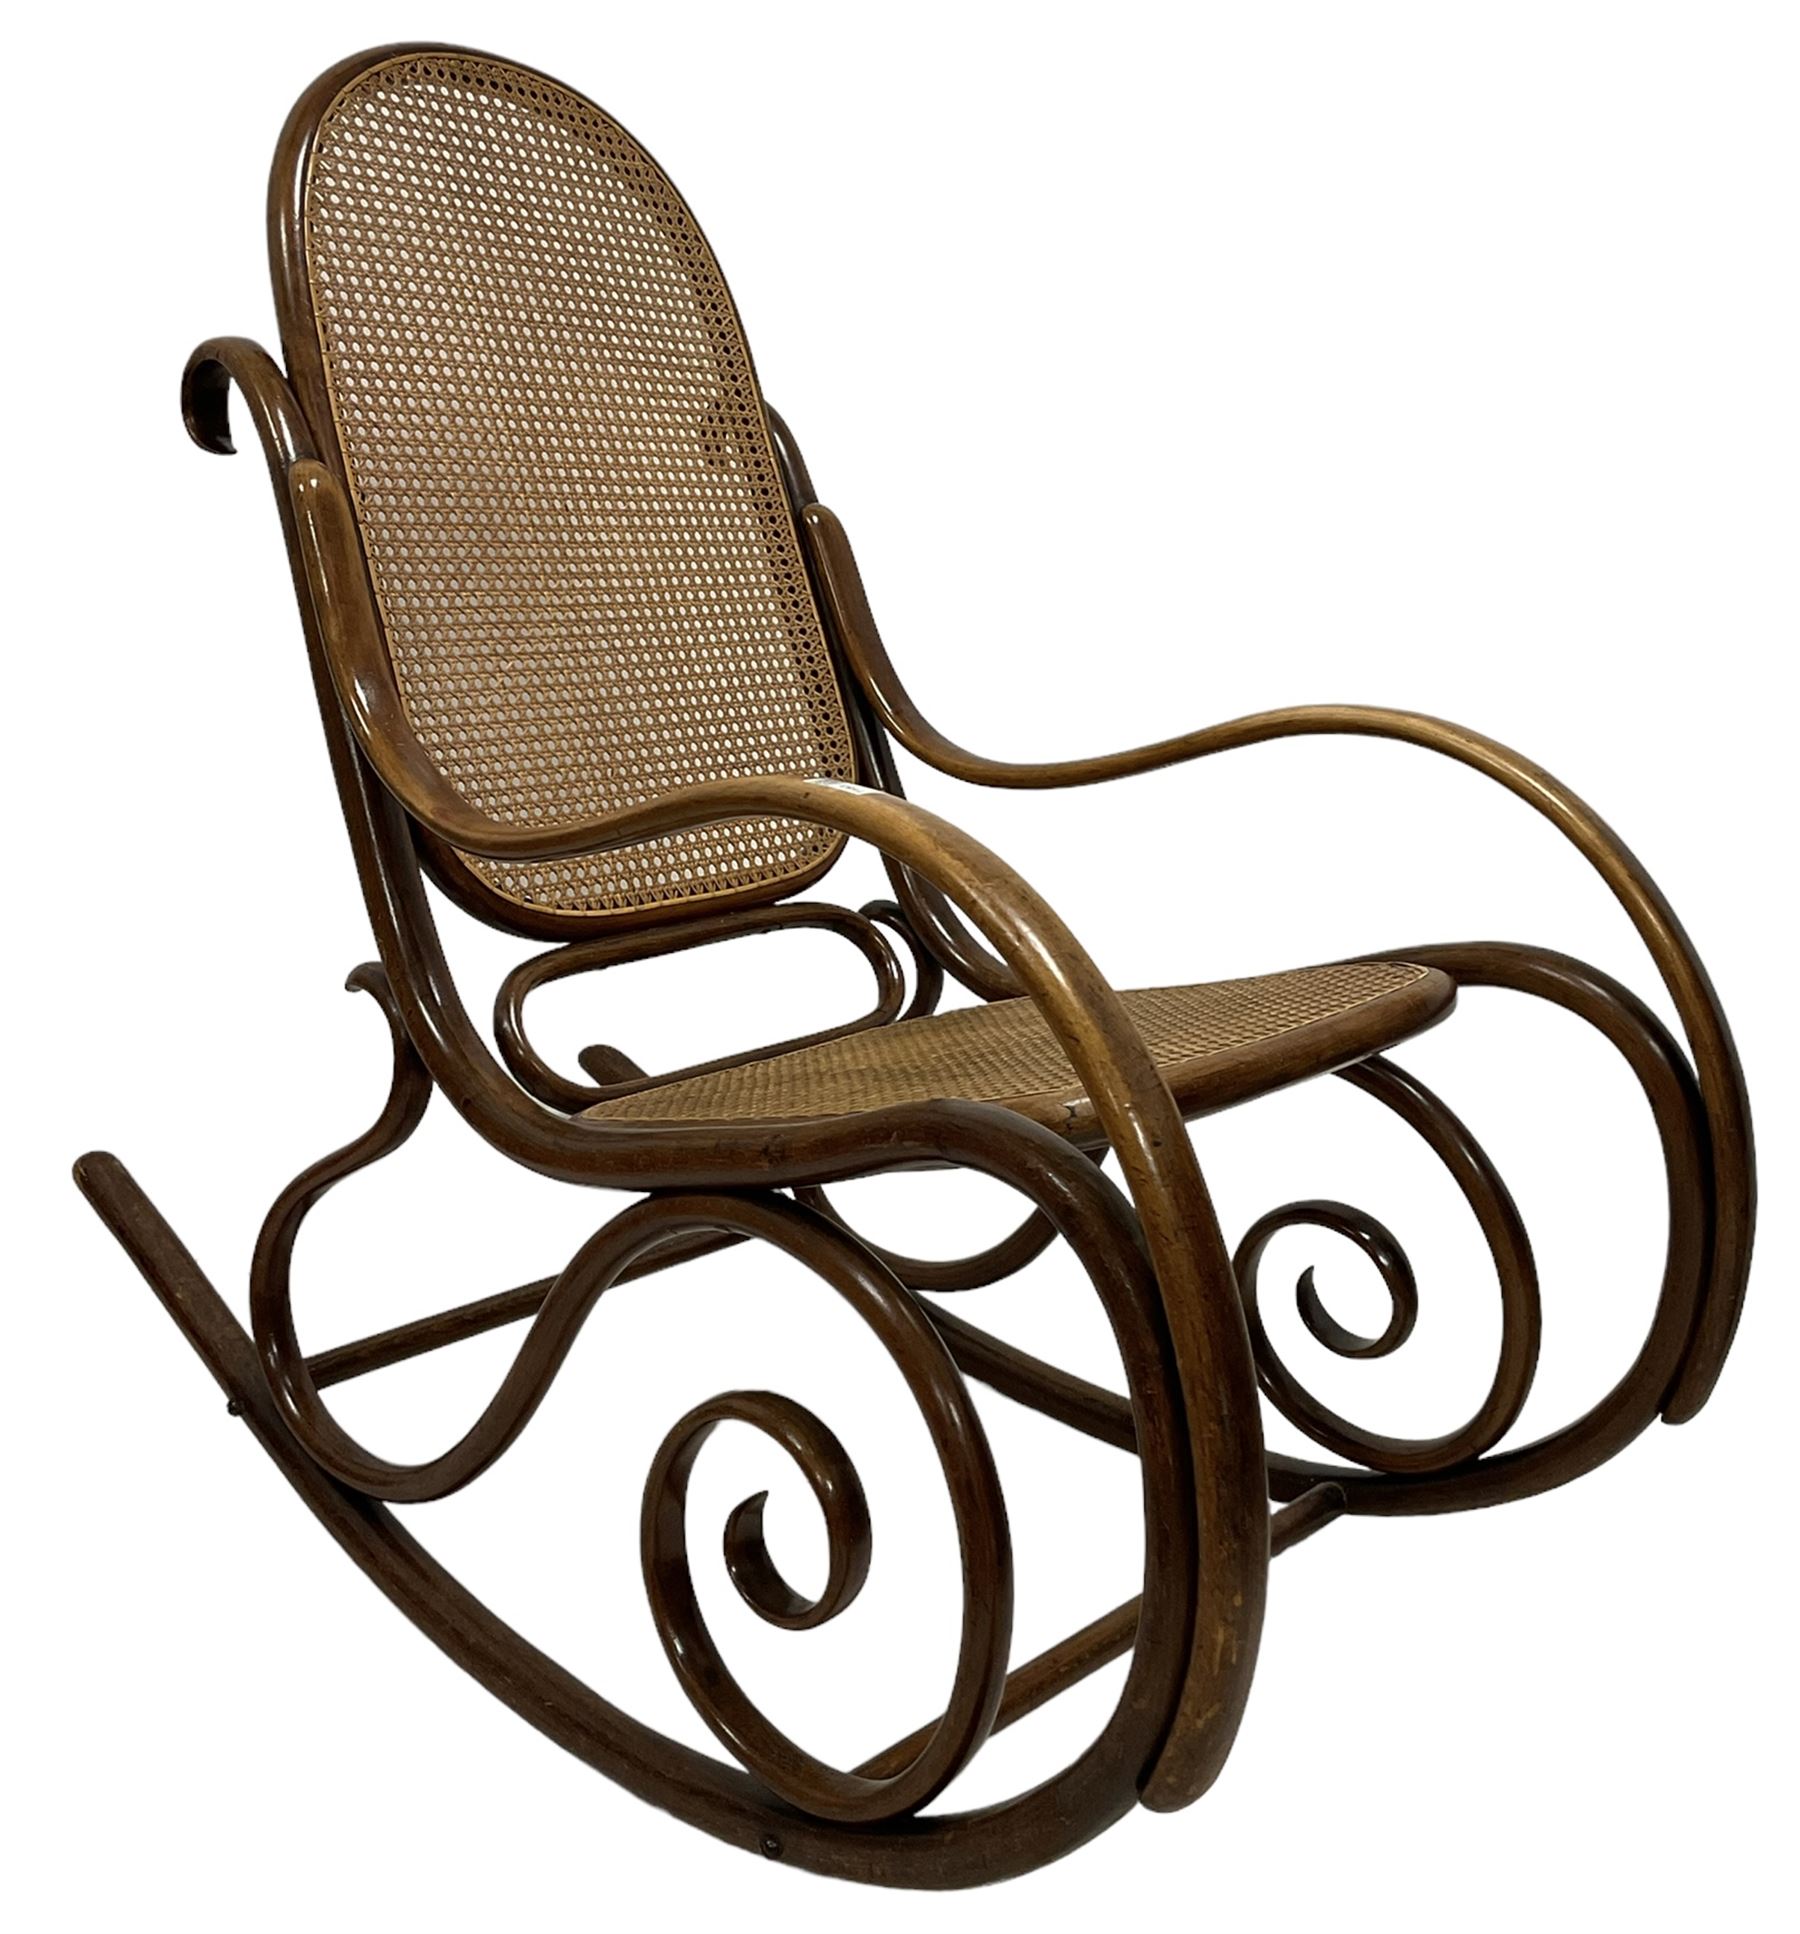 20th century bentwood rocking chair